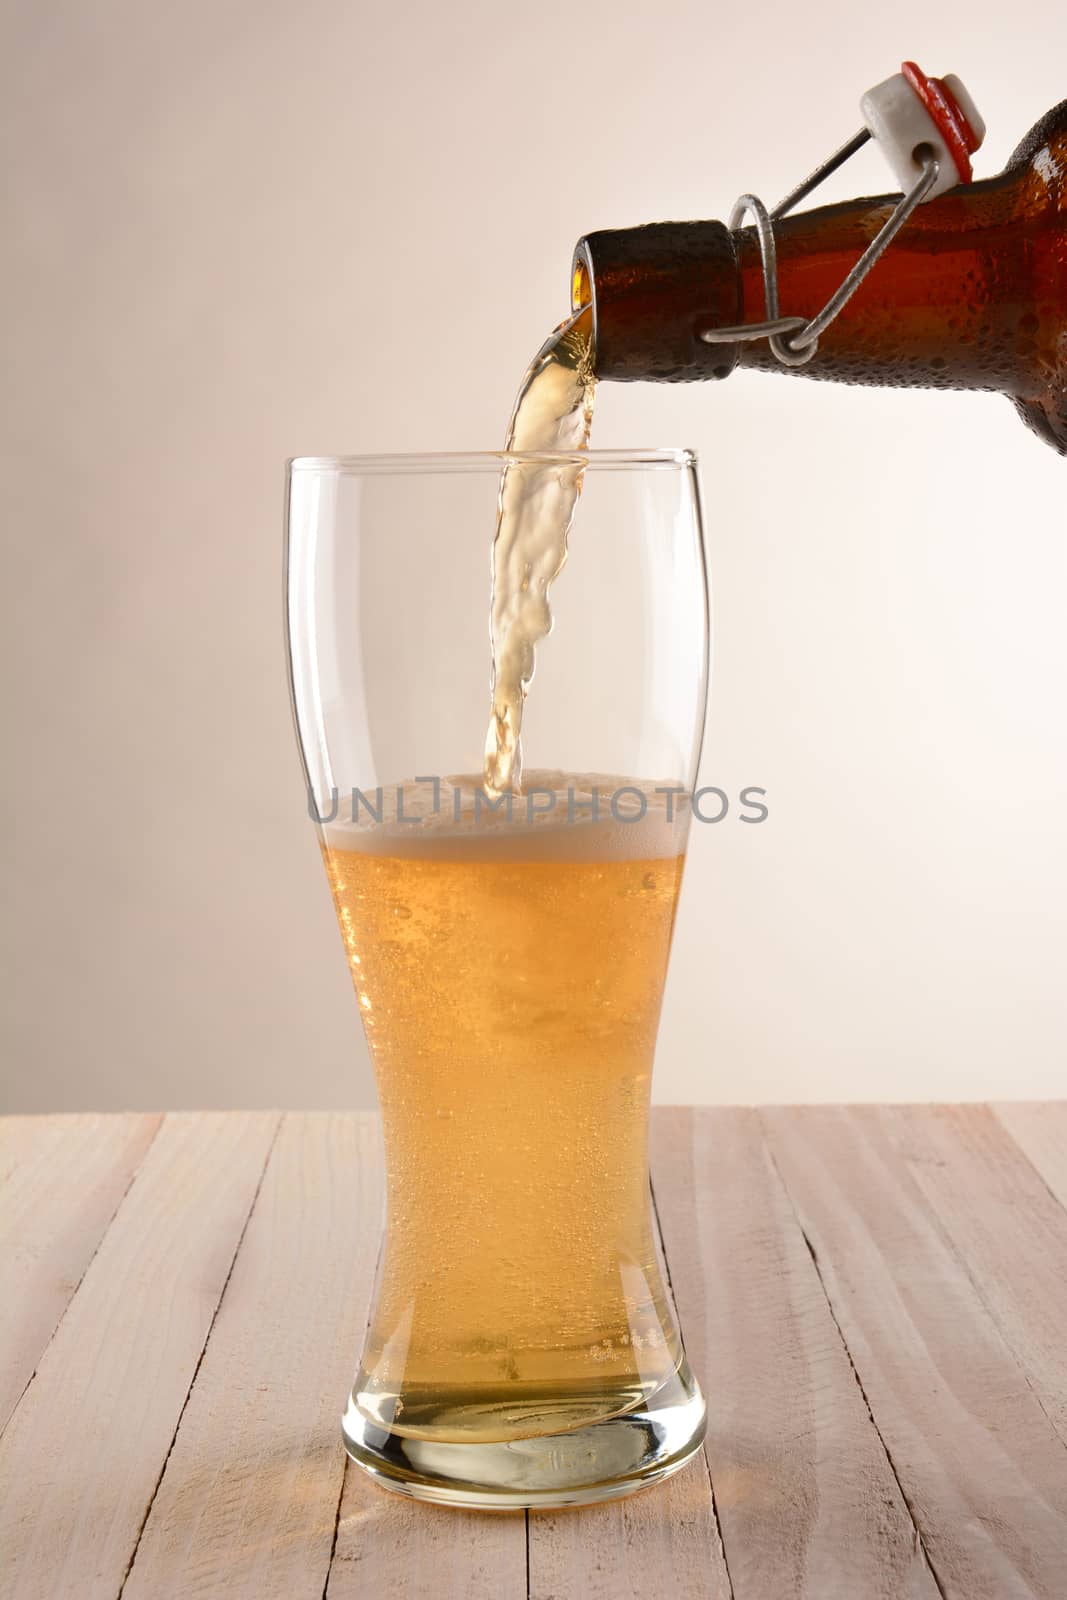 A brown swing top bottle of beer pouring into a glass. The partially filled glass is on a wood table with a light to dark background.